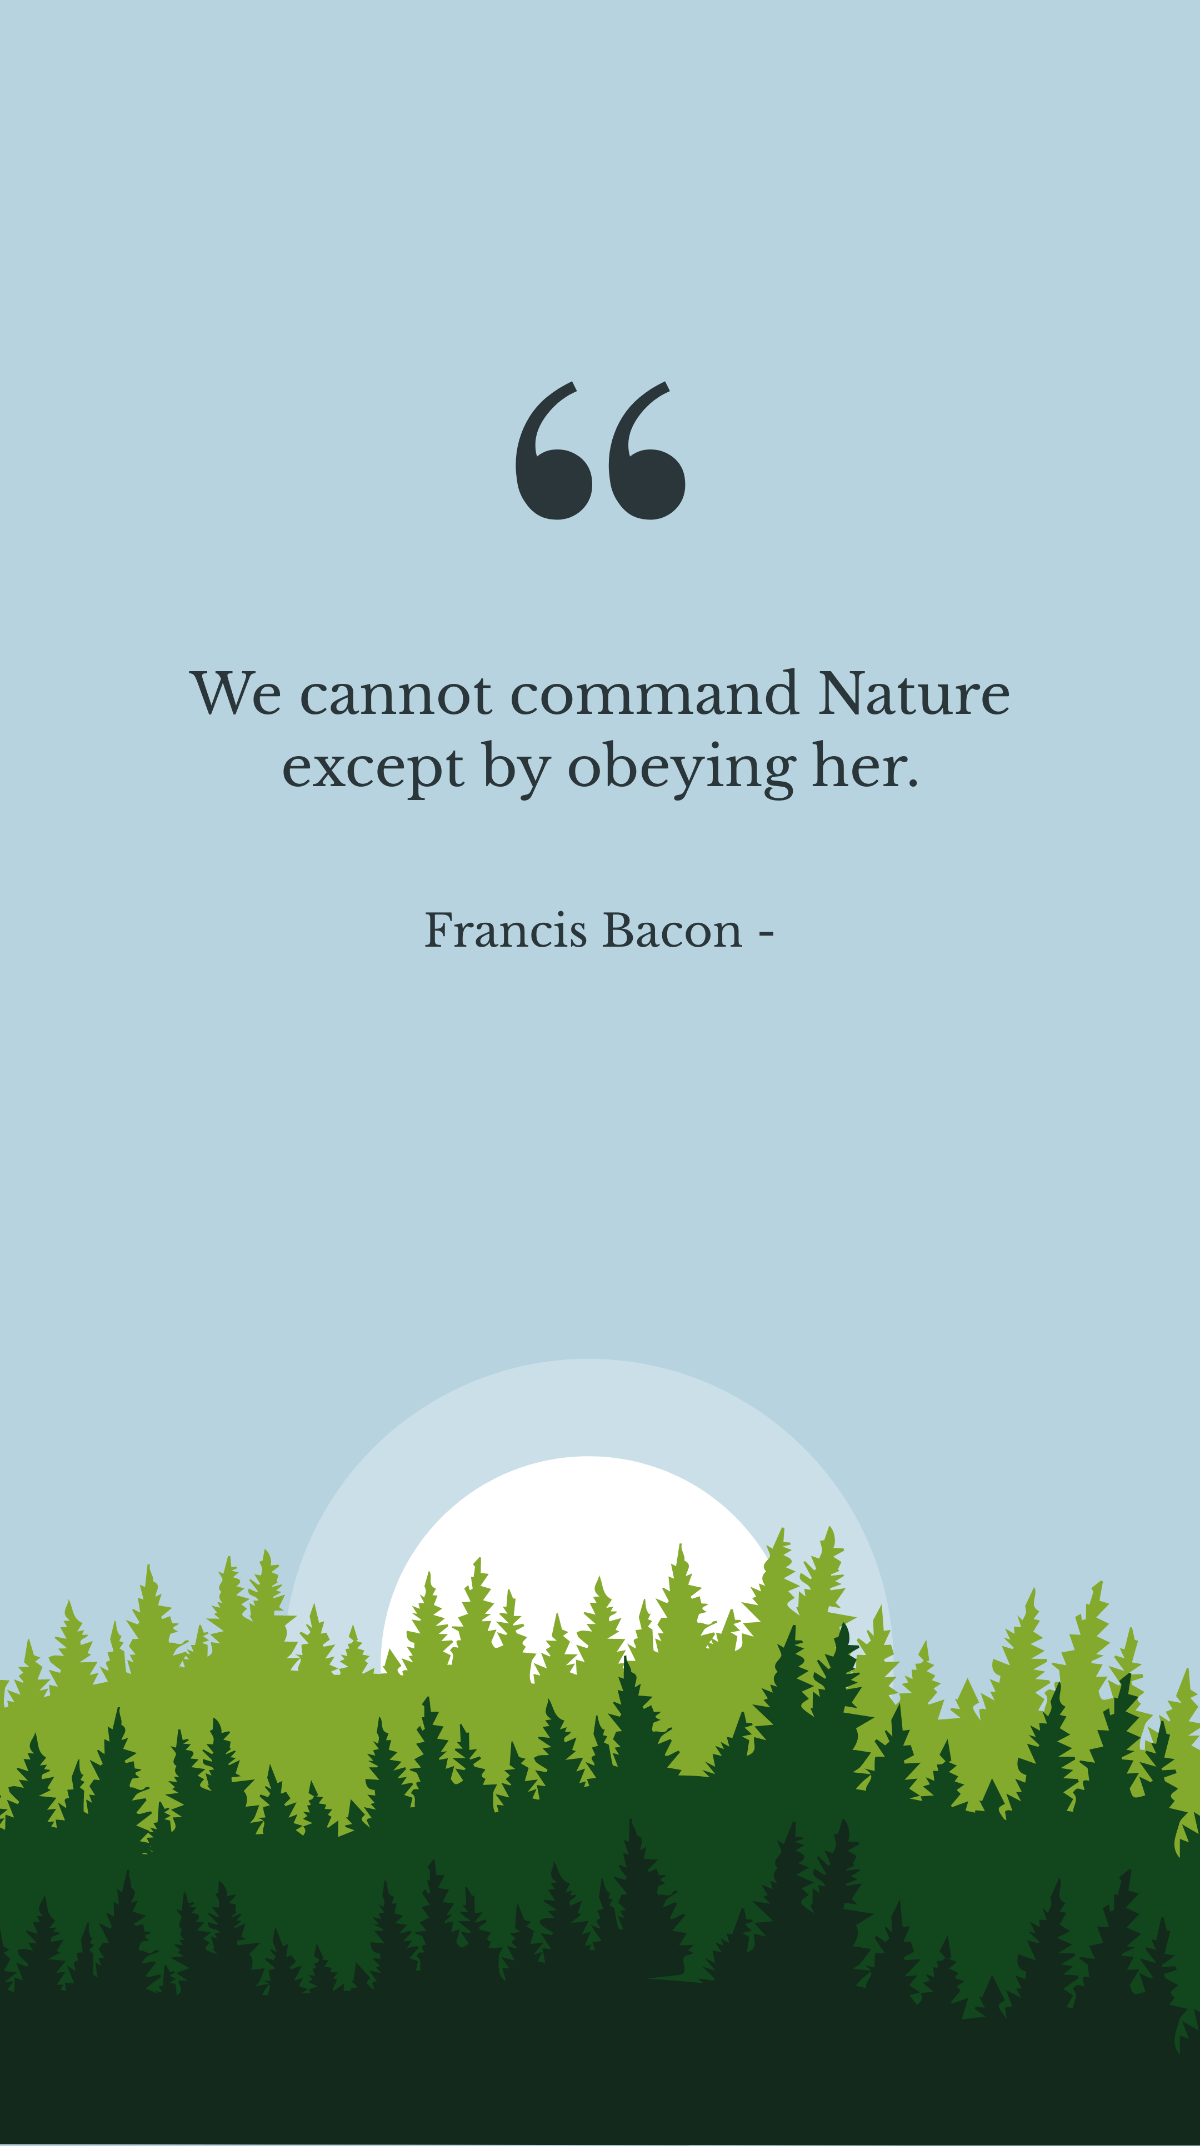 Free Francis Bacon - We cannot command Nature except by obeying her. Template